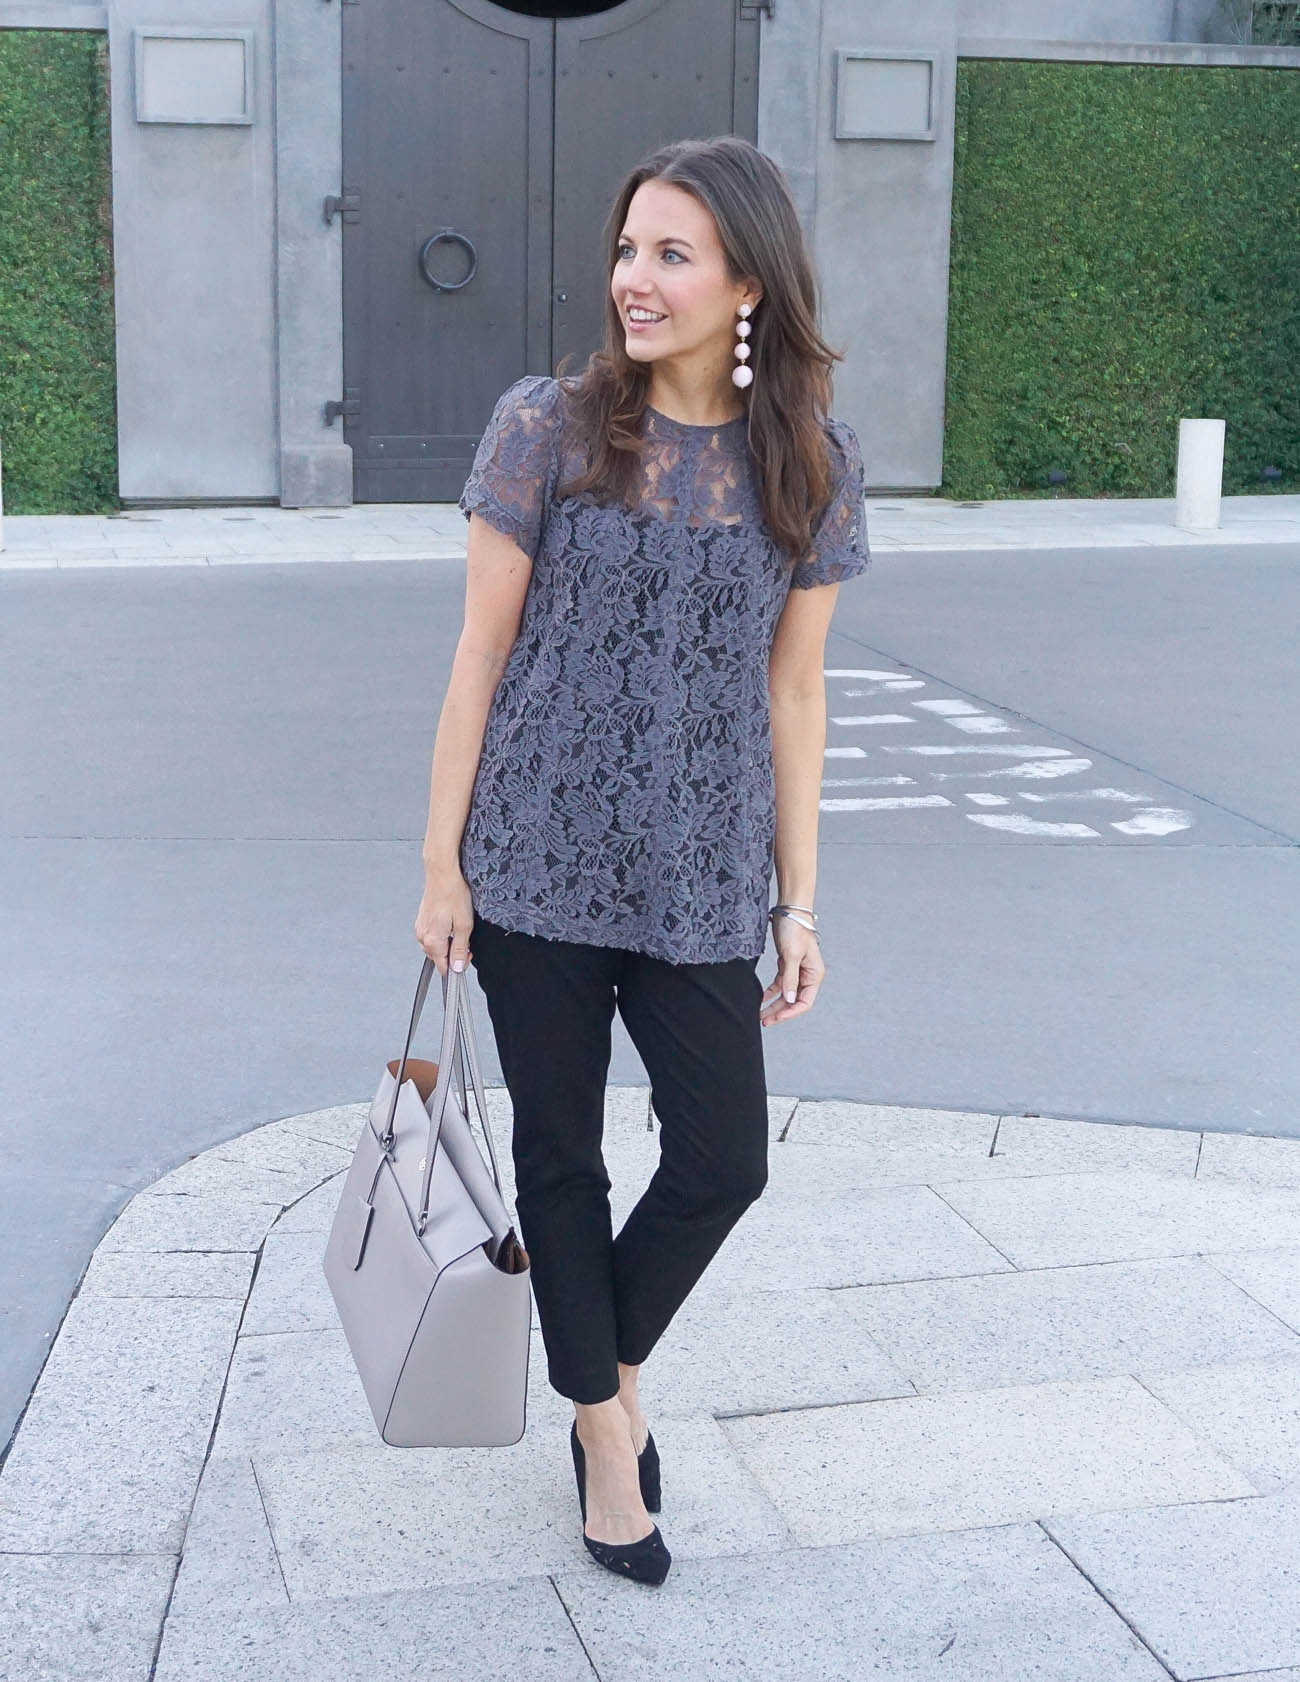 Arriba 49+ imagen gray blouse outfit